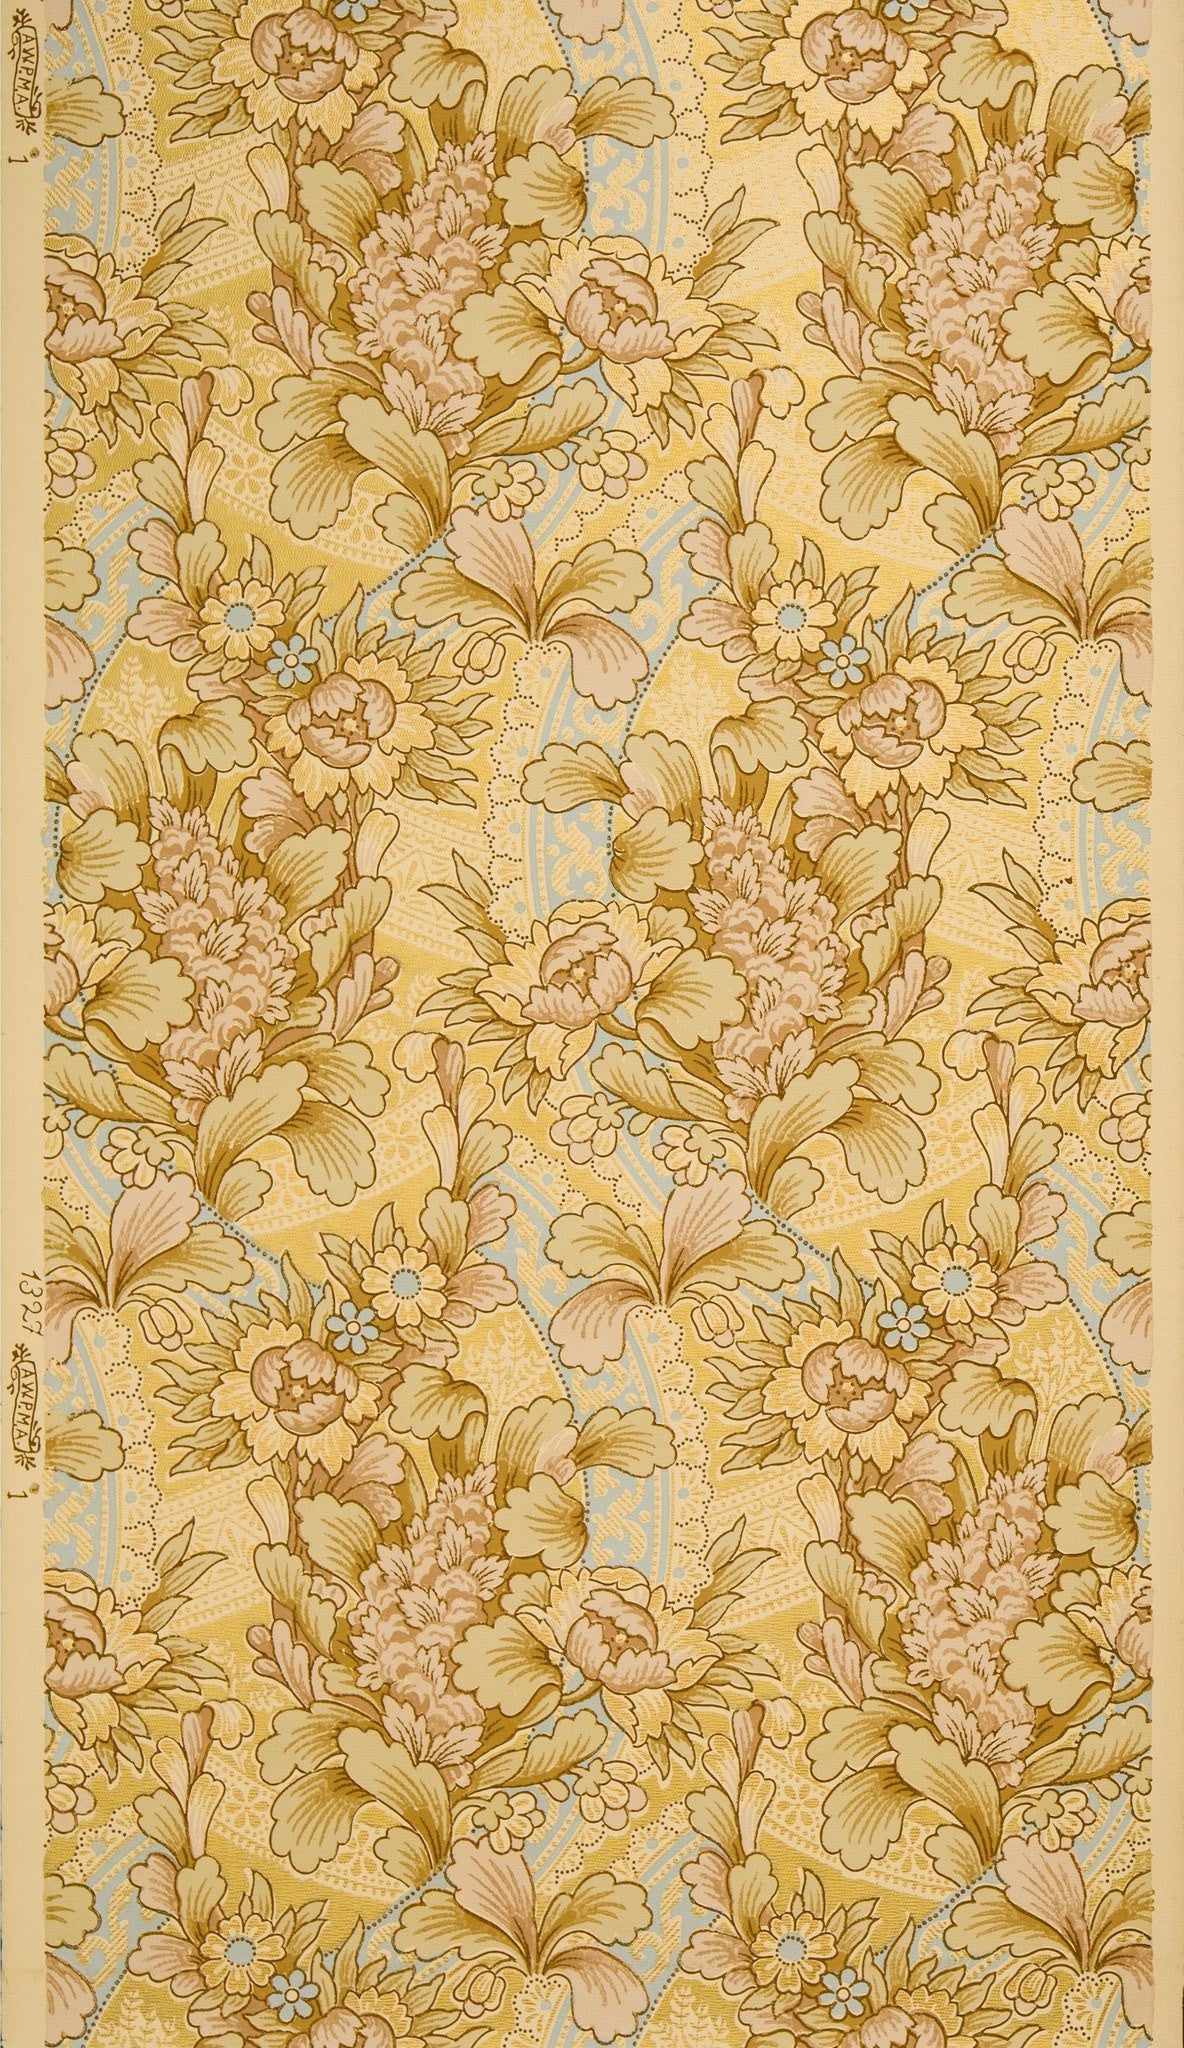 Flowing All-Over Floral/Foliate-Antique Wallpaper - Bolling & Company